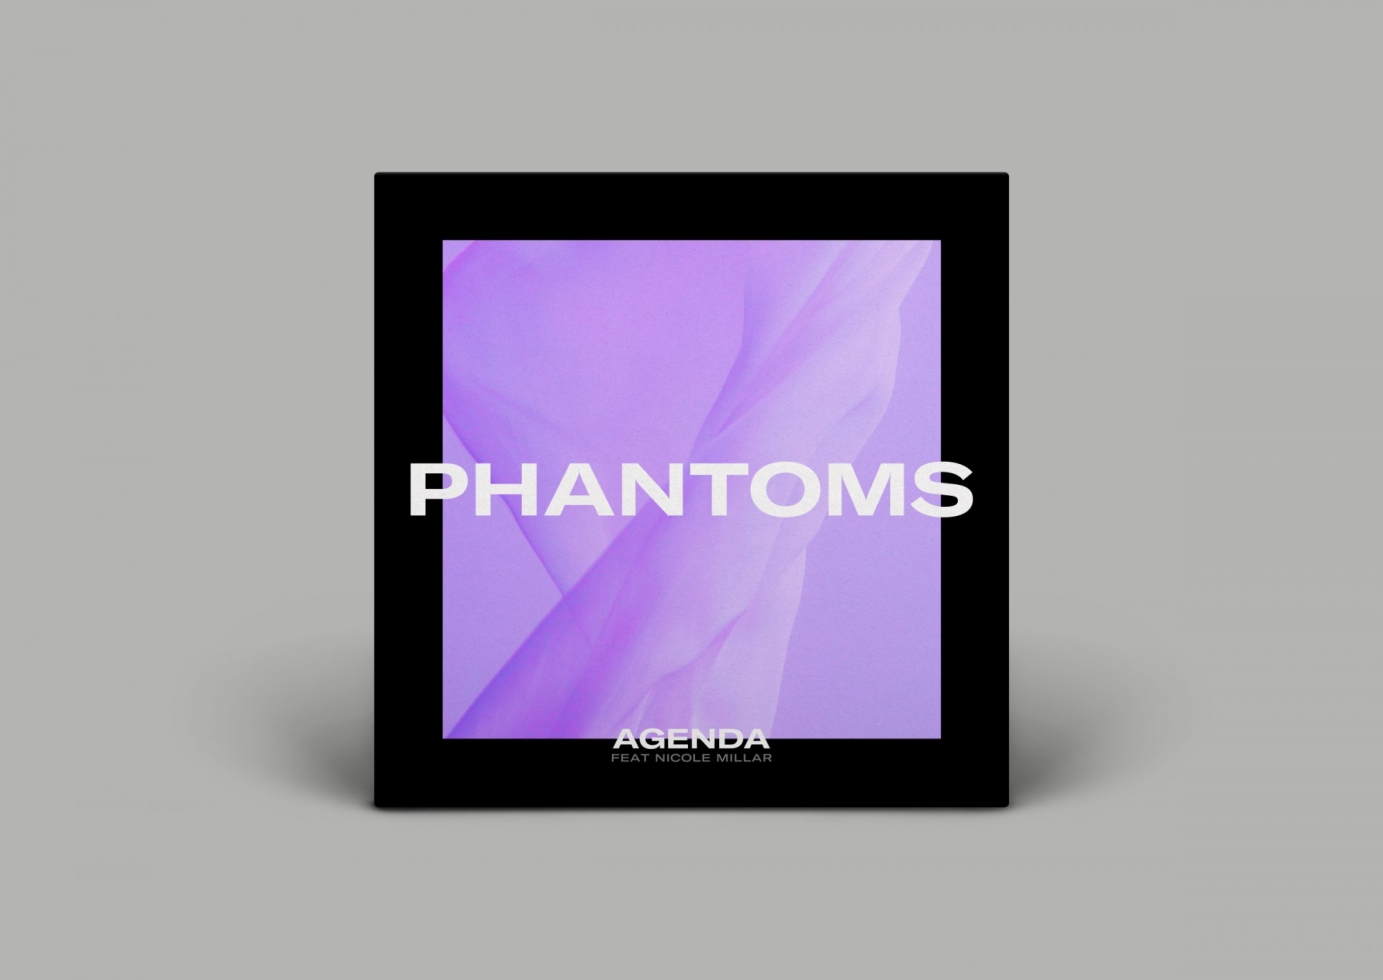 Creative direction for Phantoms by Tristan Palmer